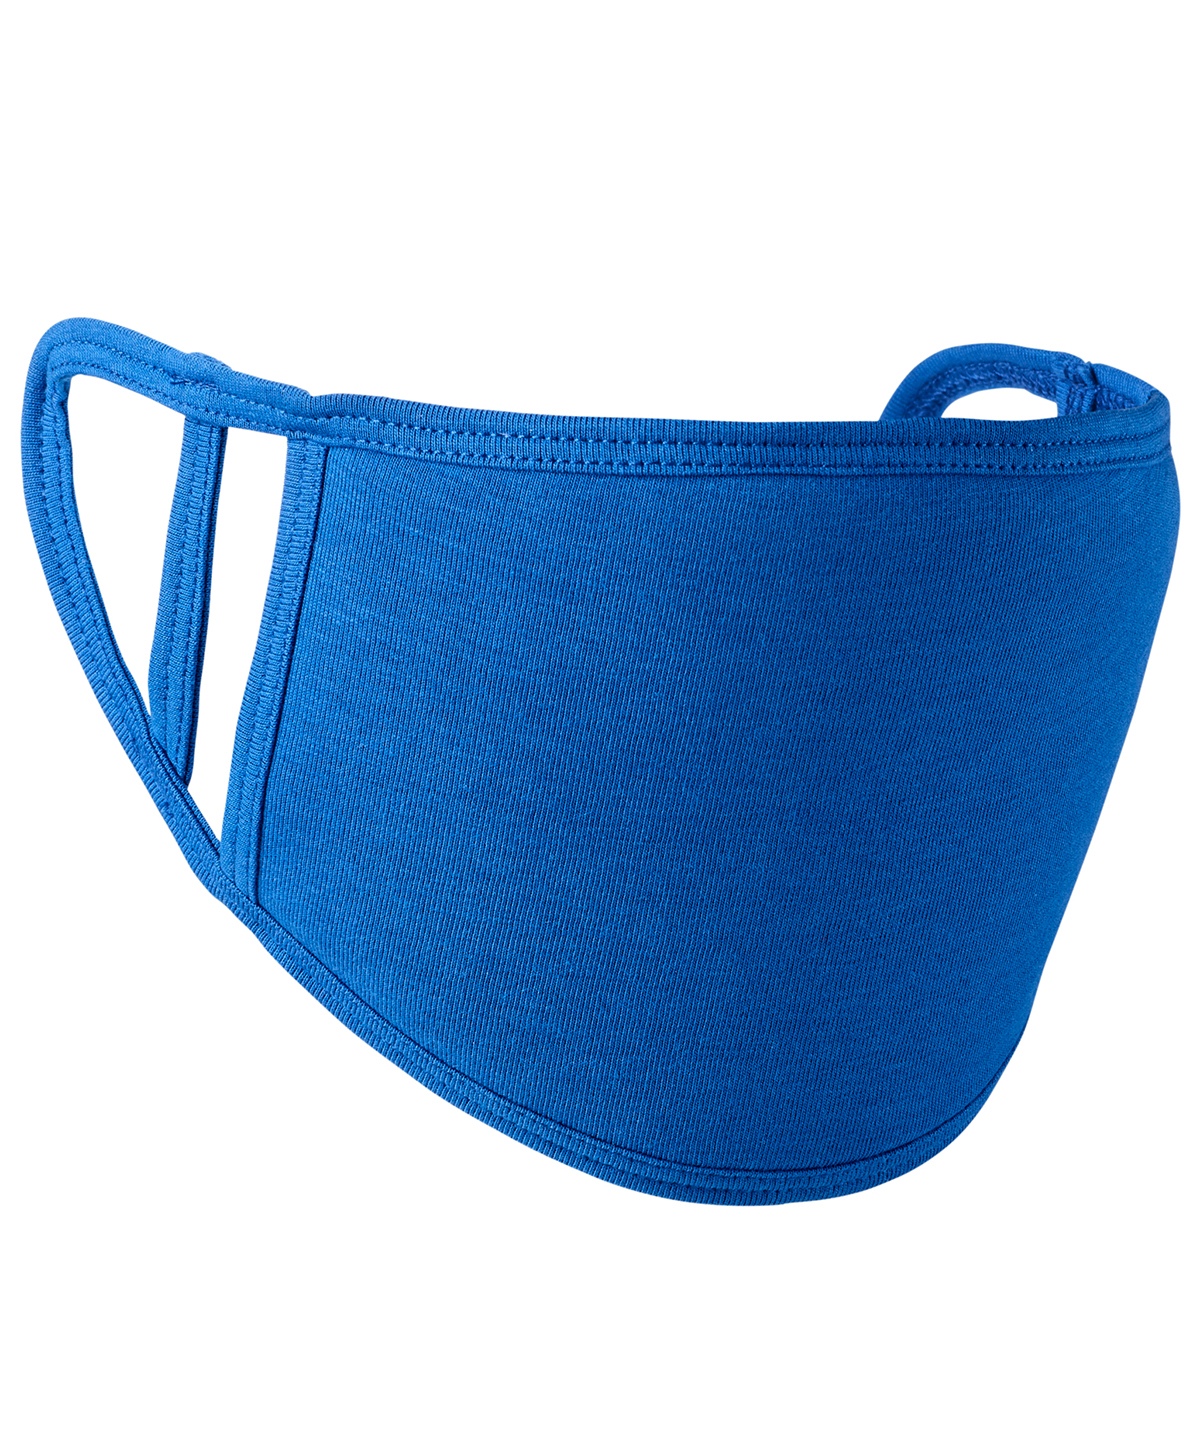 Washable 2-ply Face Covering in blue